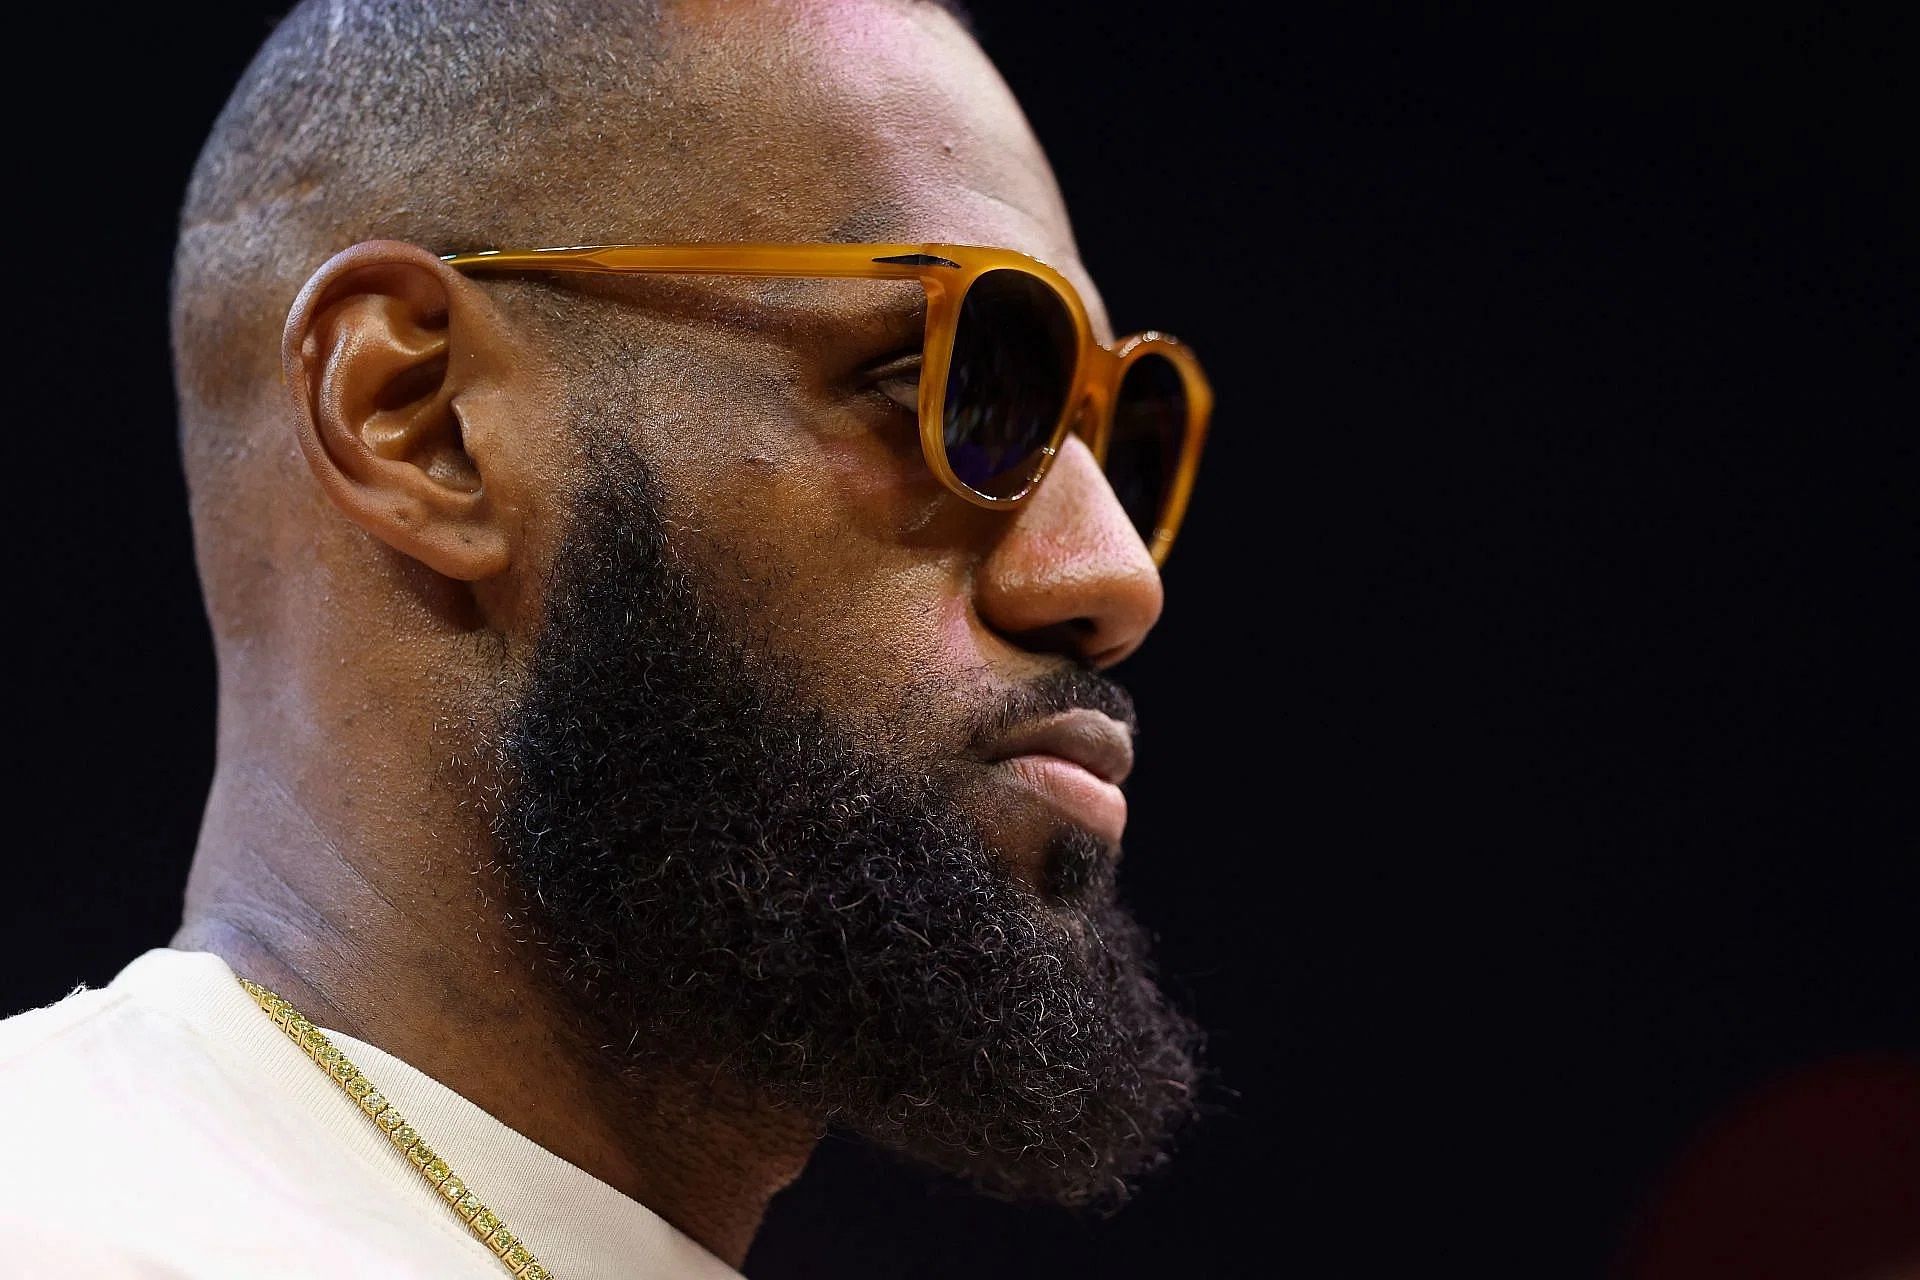 LeBron James is currently in Saudi Arabia, sparking both speculation and excitement.